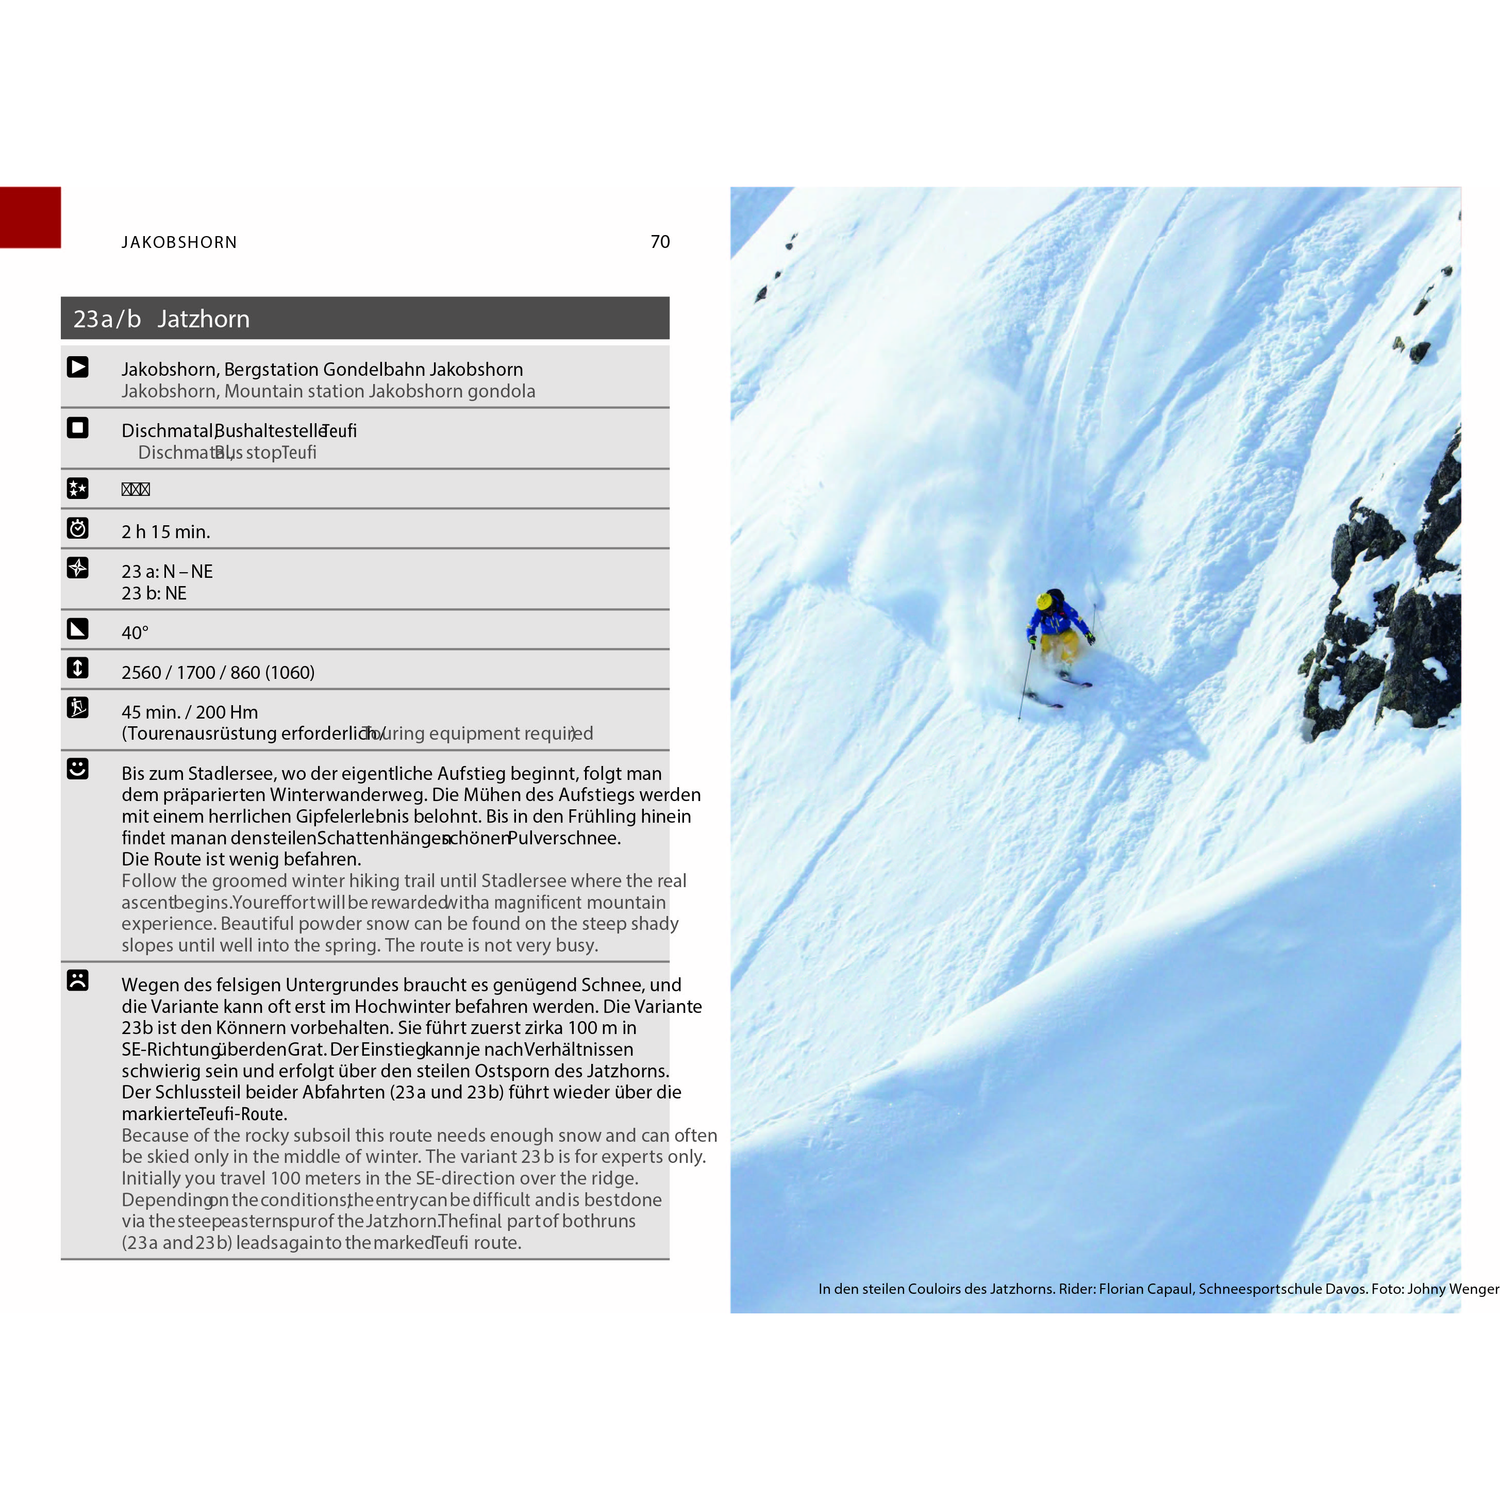 Freeride Guide Davos Klosters | Backcountry Books